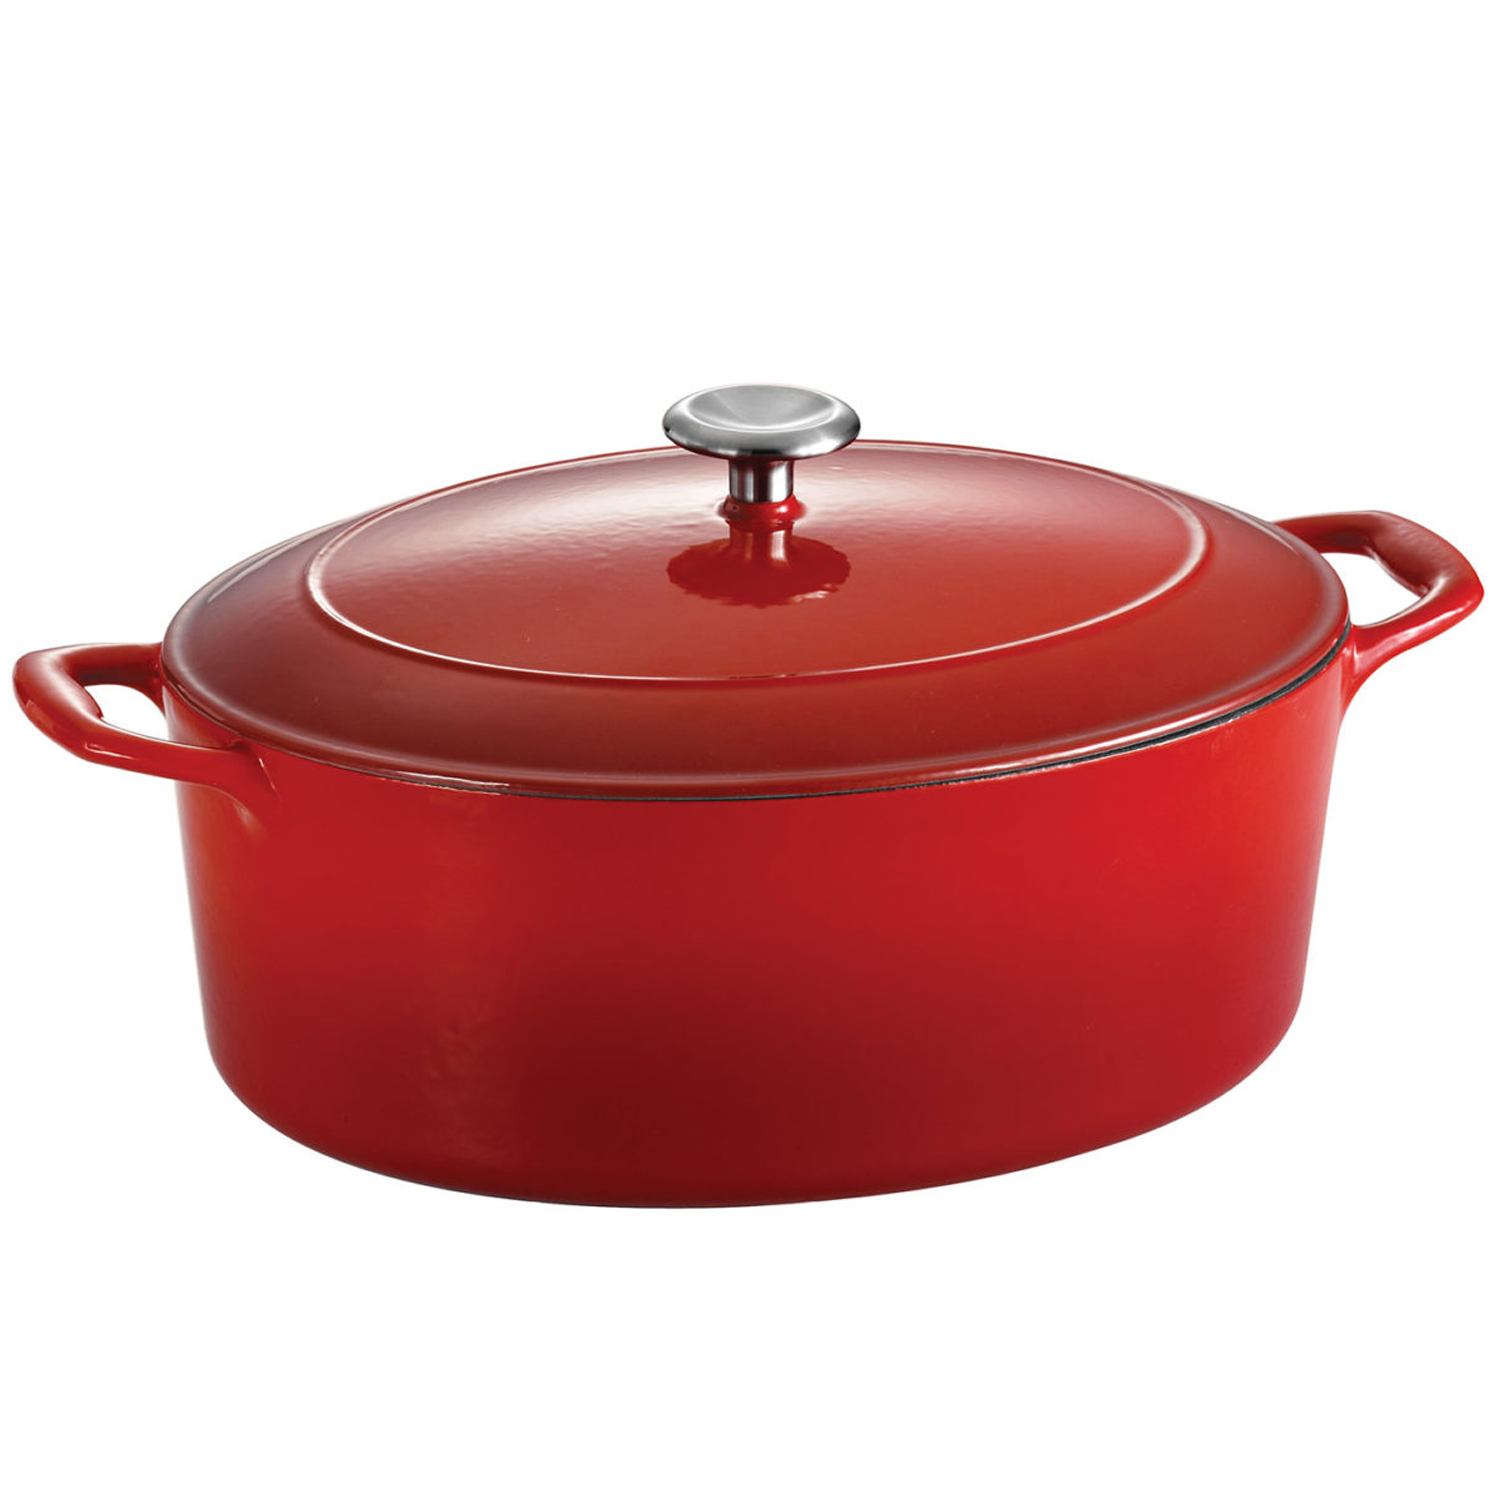 Tramontina Gourmet Enameled Cast Iron Skillet - Gradated Red - 10 in.